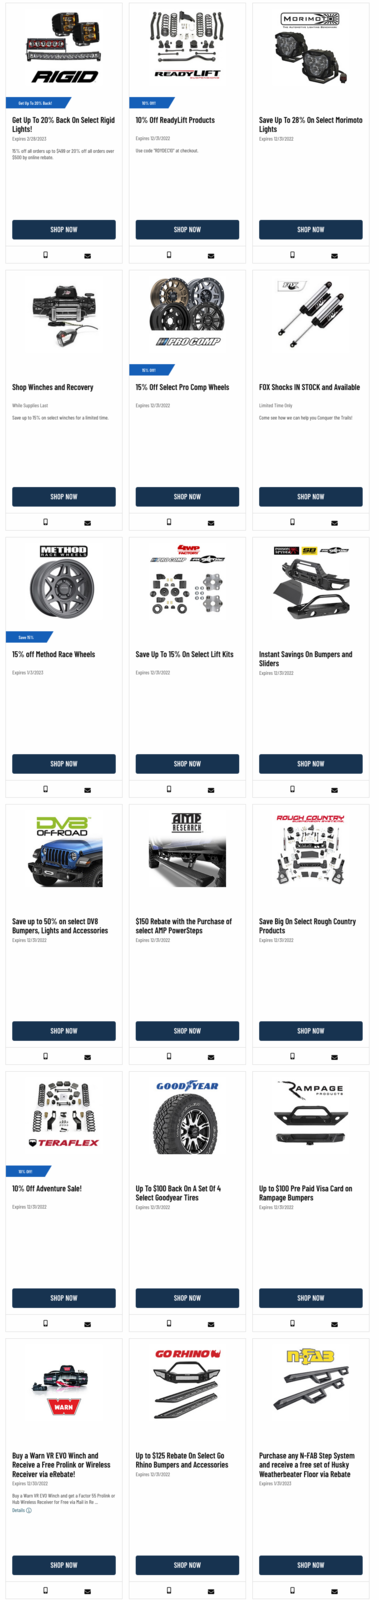 Screenshot 2022-12-27 at 21-18-01 Coupons Offers & Discounts.png